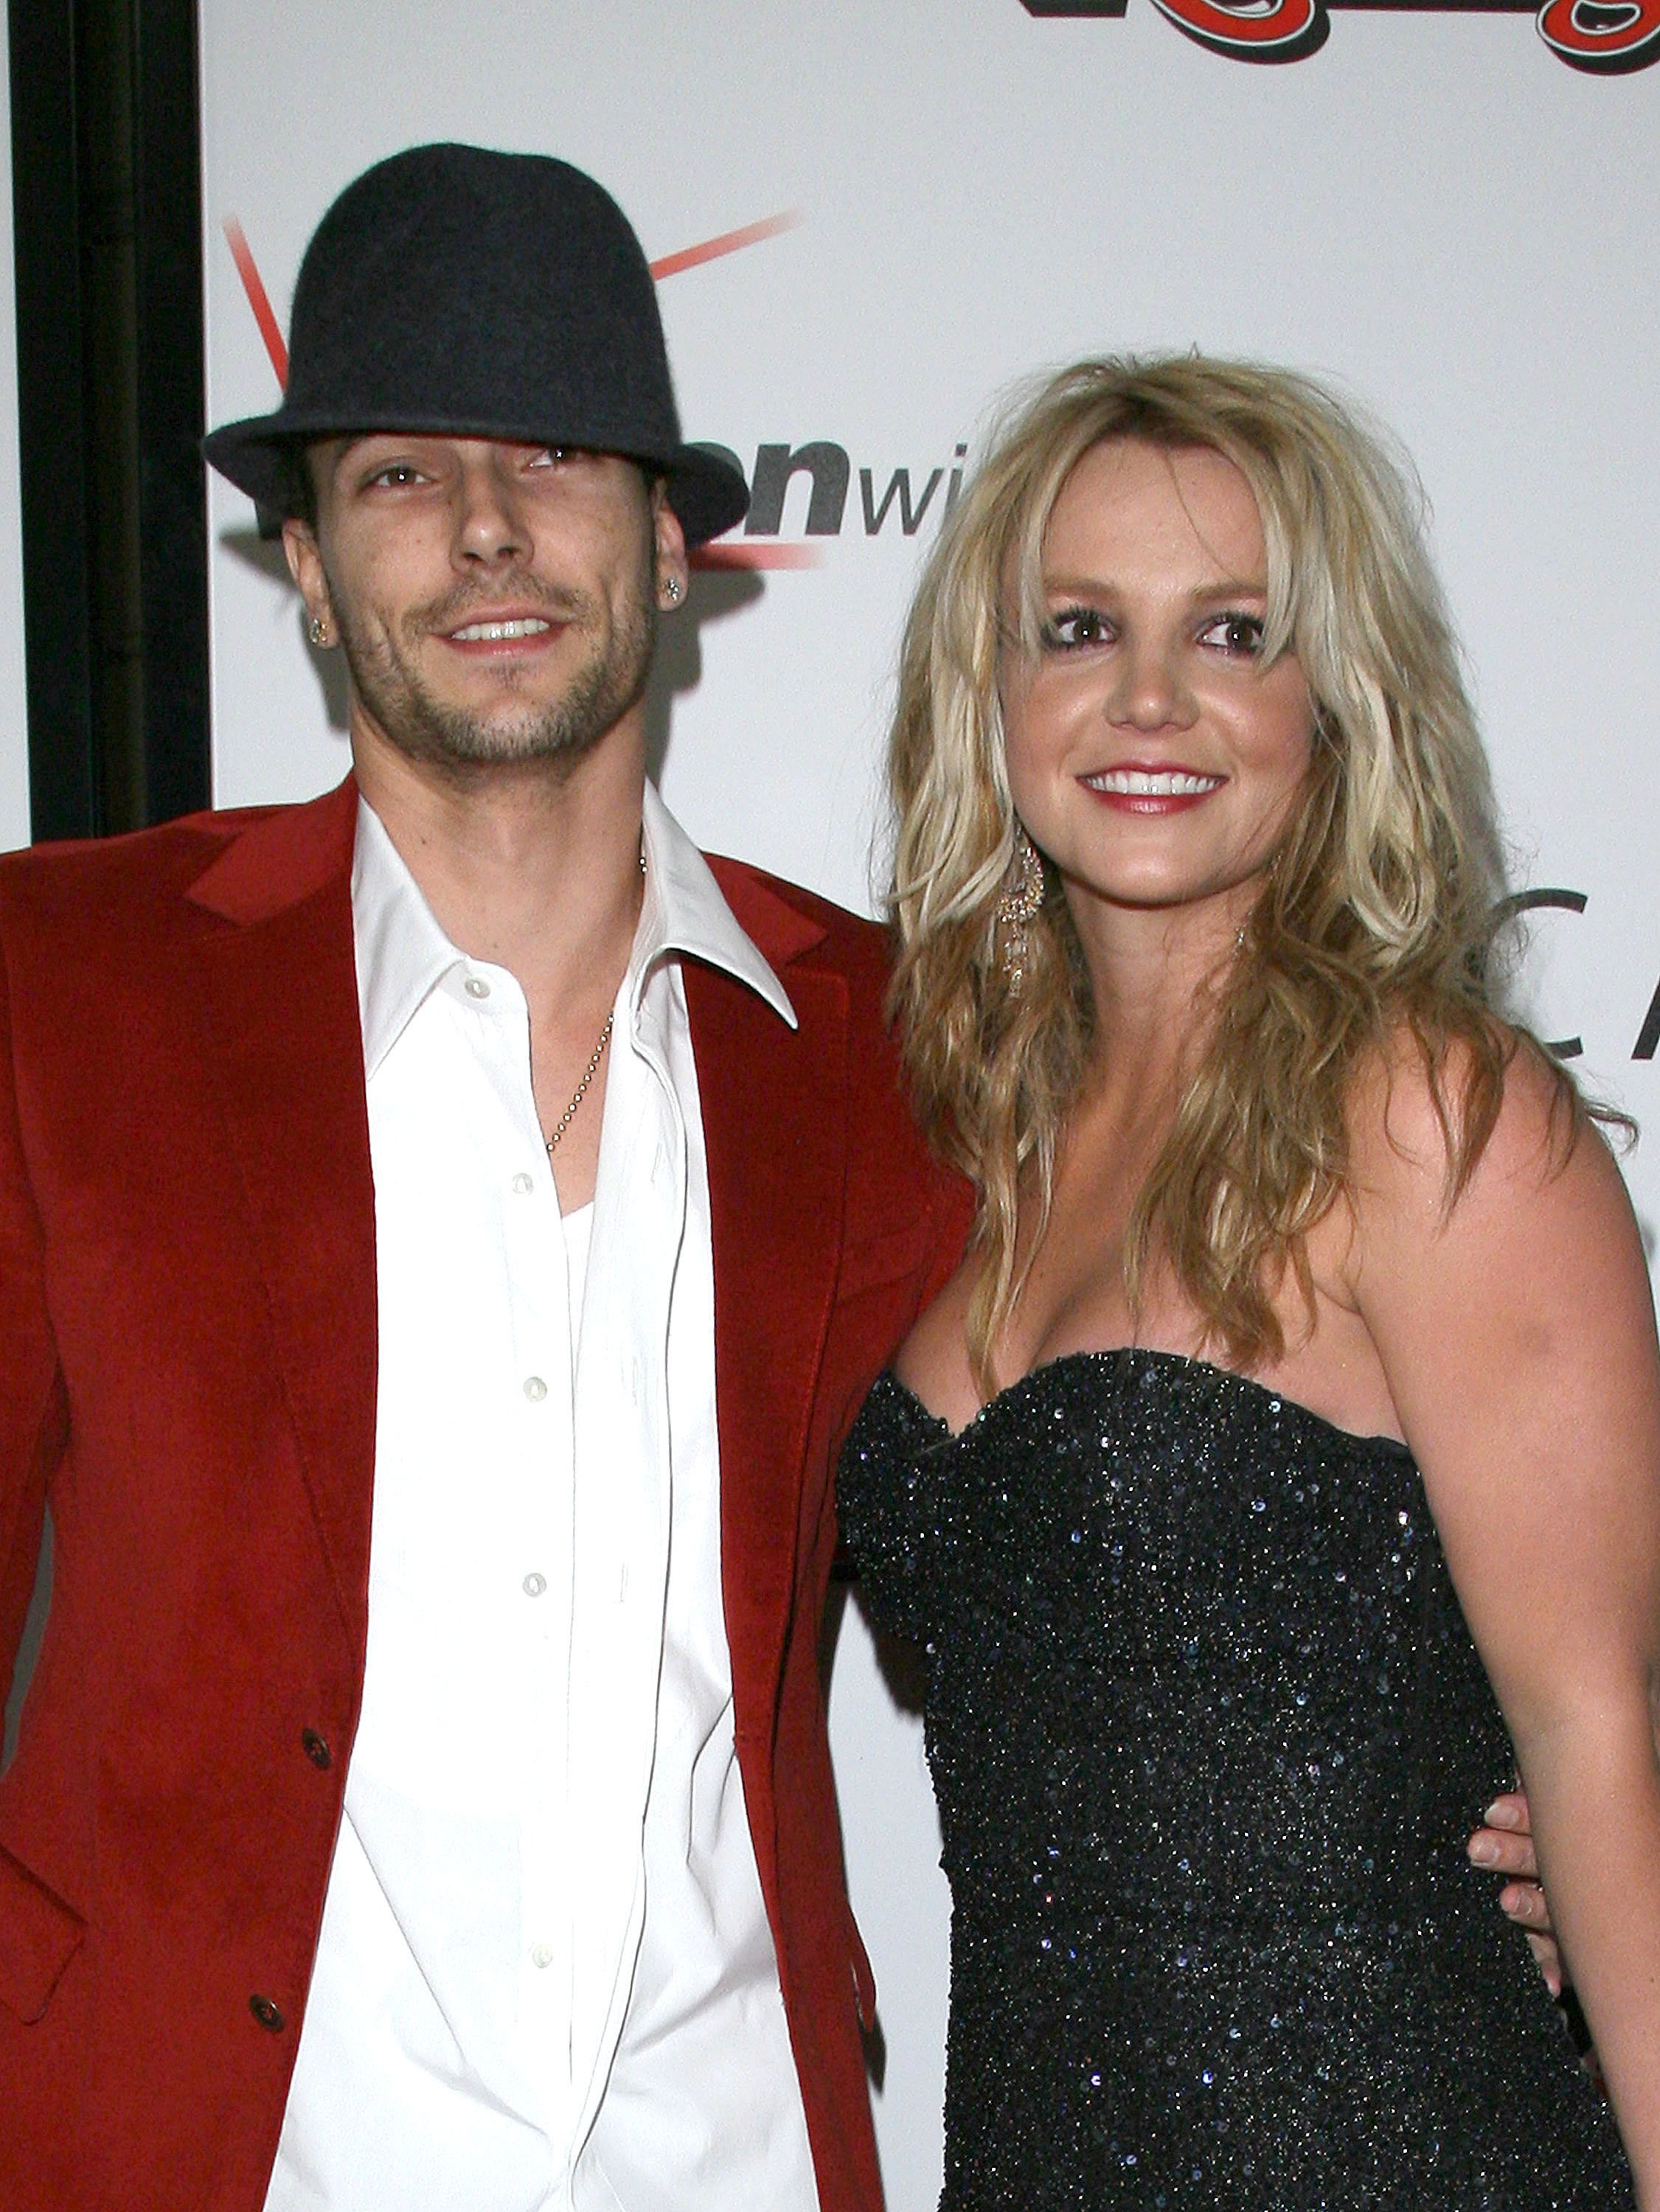 Kevin Federline and Britney Spears at the Pre-Grammy concert with Kanye West on February 6, 2006 | Source: Getty Images